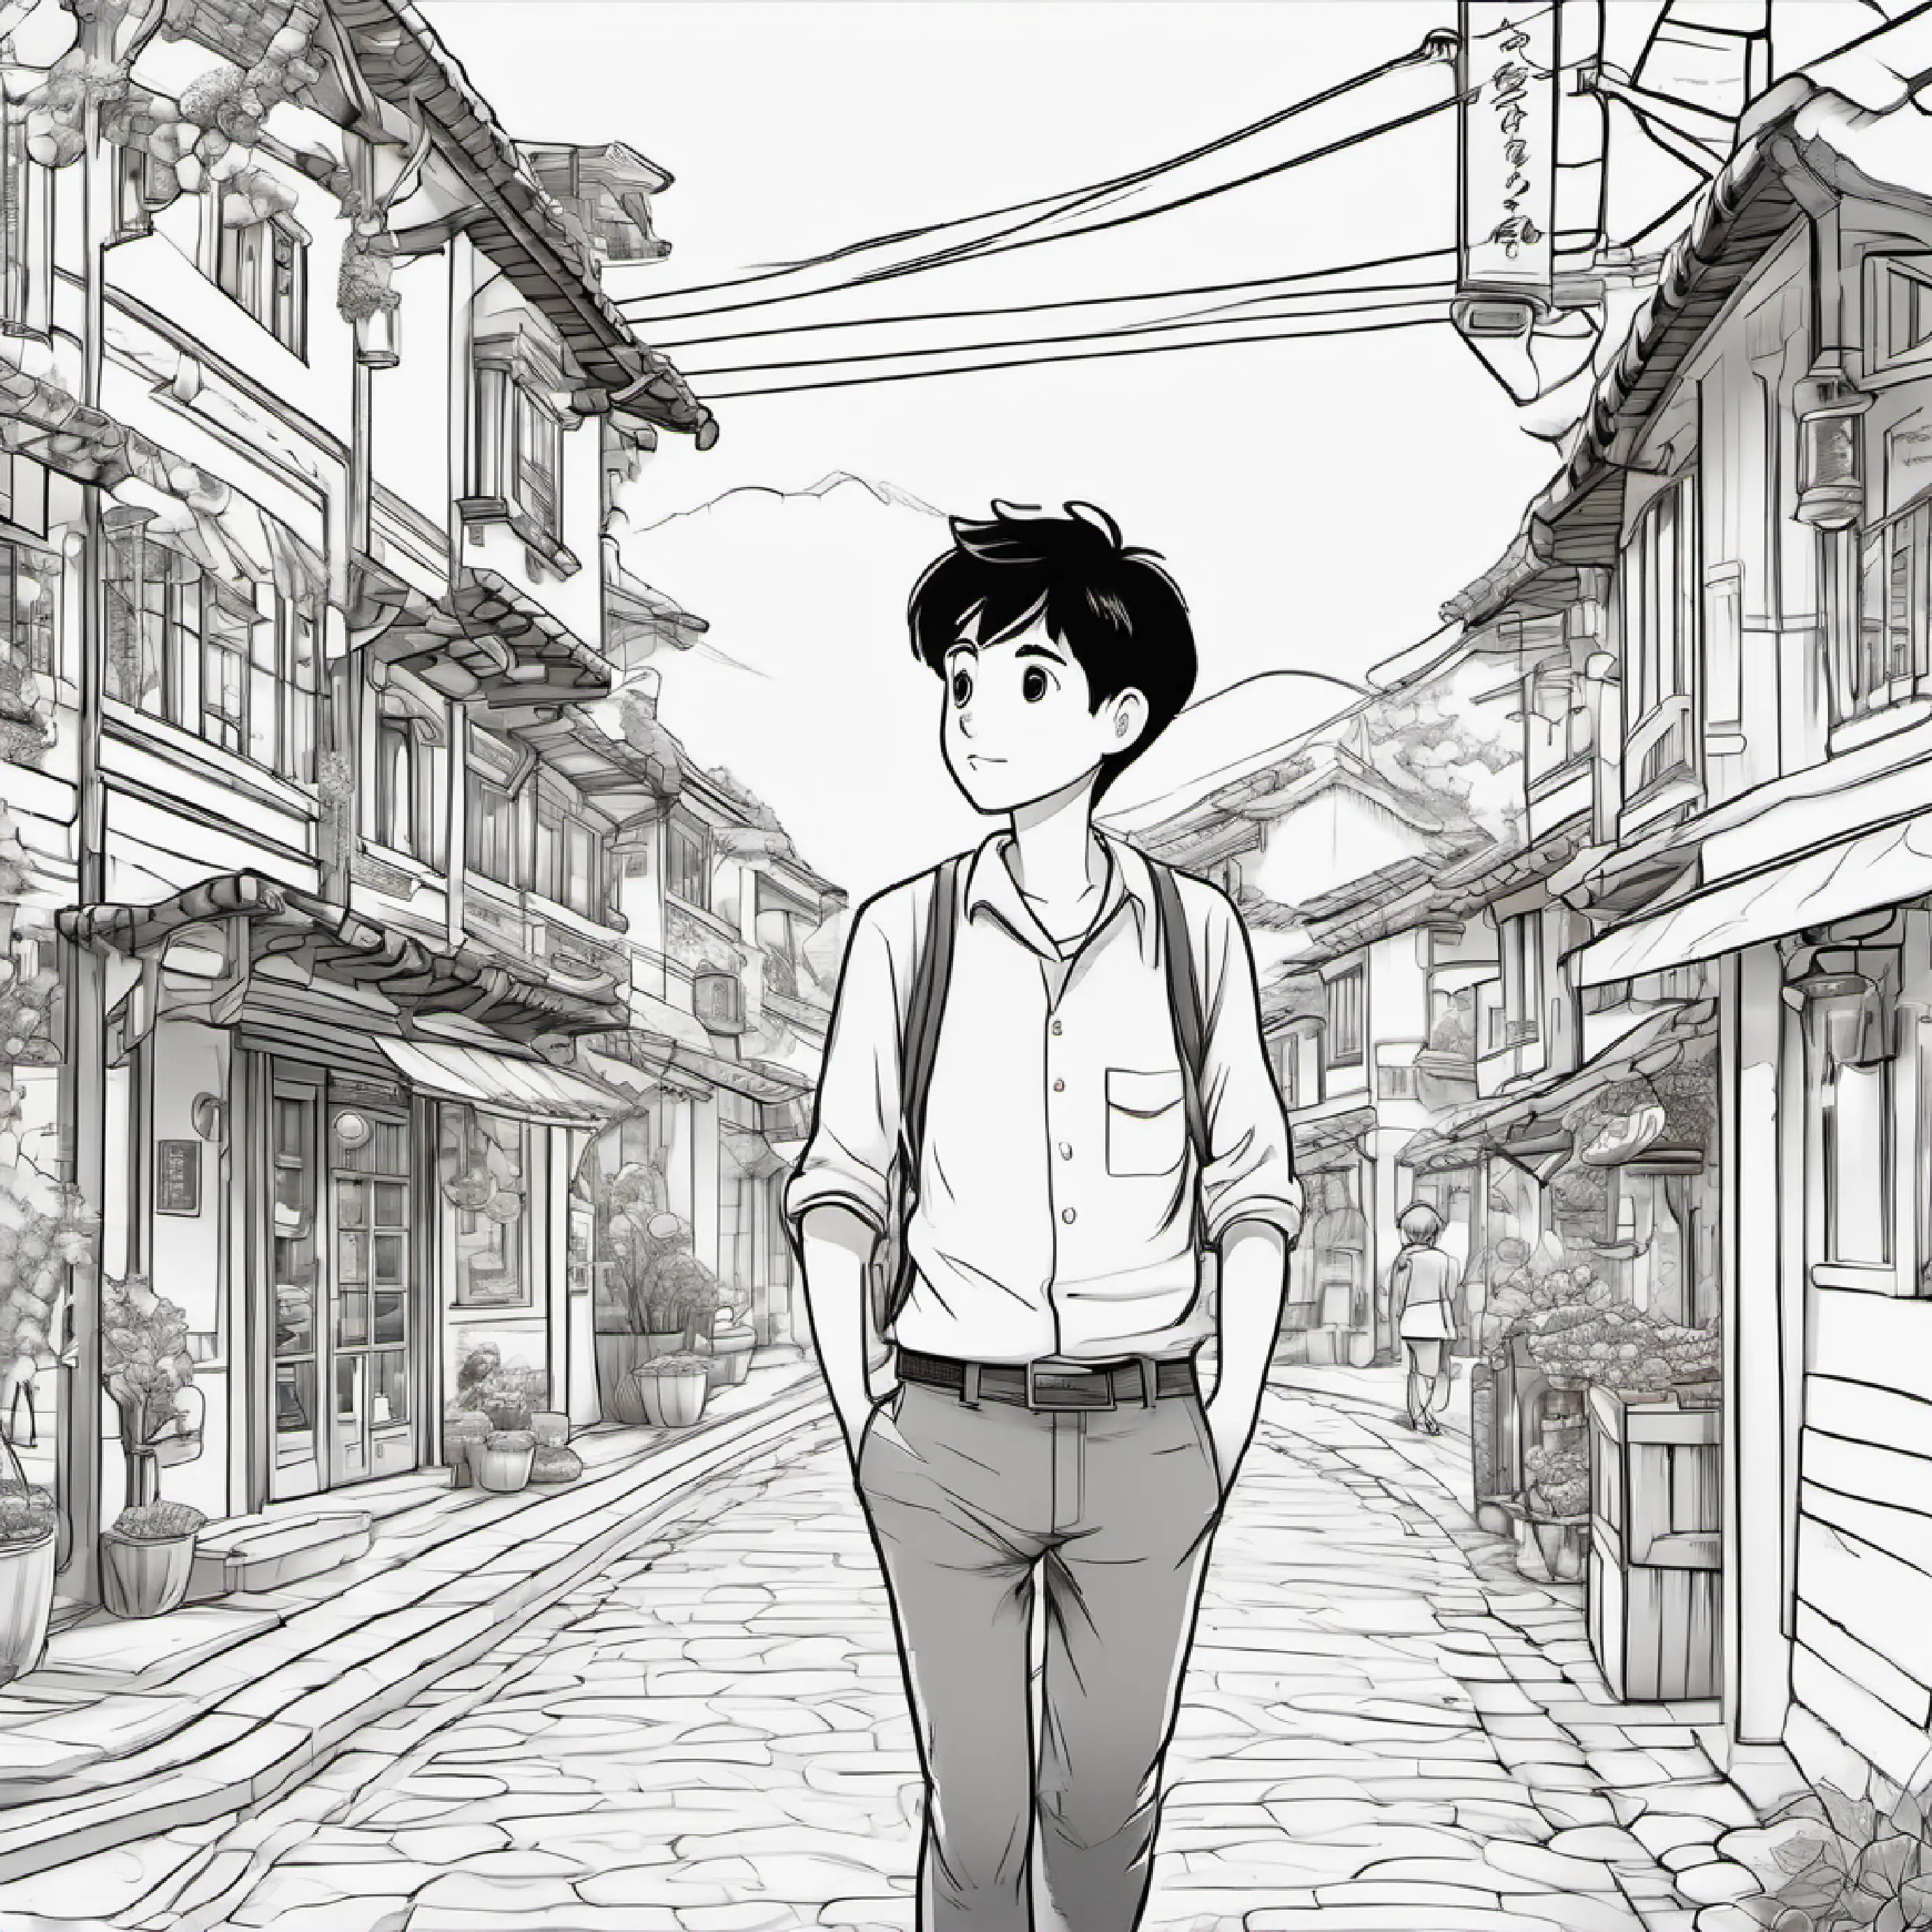 Introduction of New boy with short black hair and thoughtful brown eyes's predicament, he misses his old town.